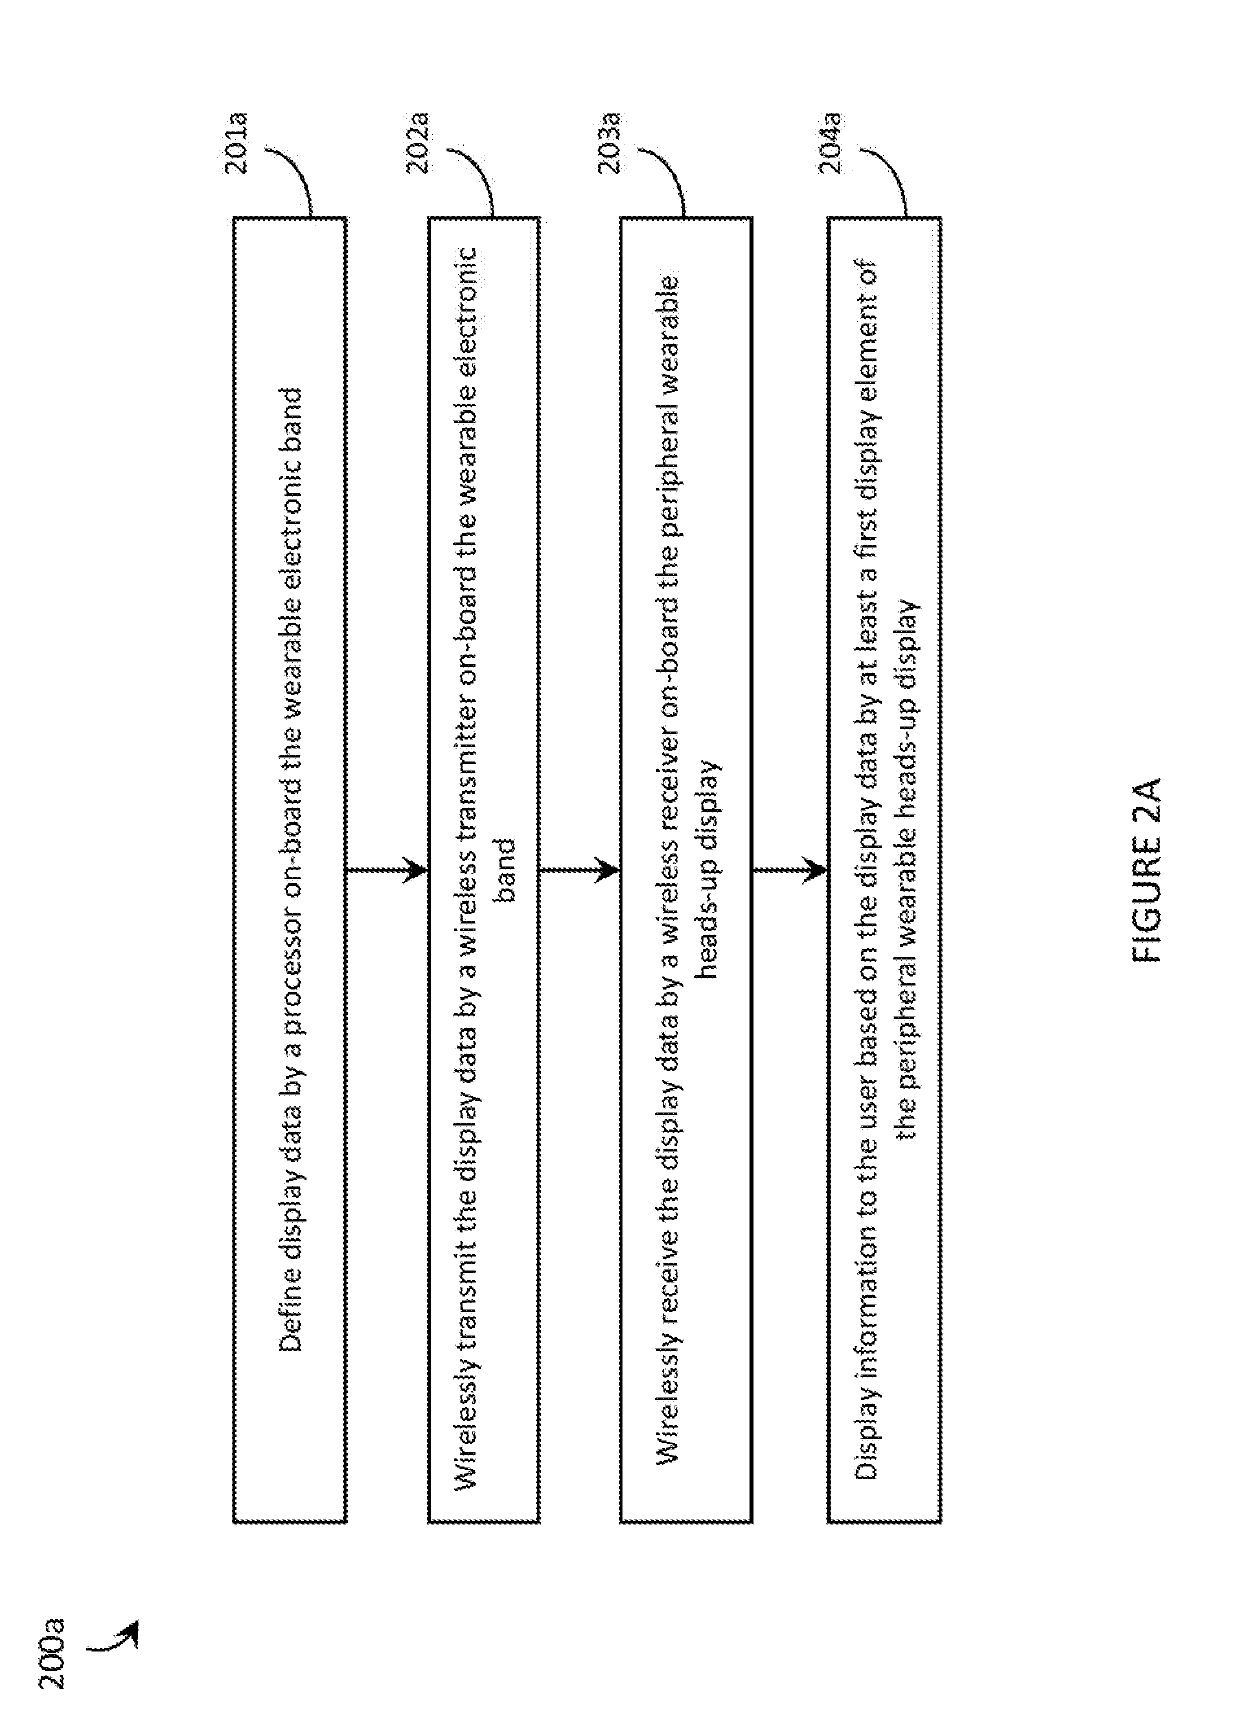 Systems, devices, and methods for wearable computers with heads-up displays